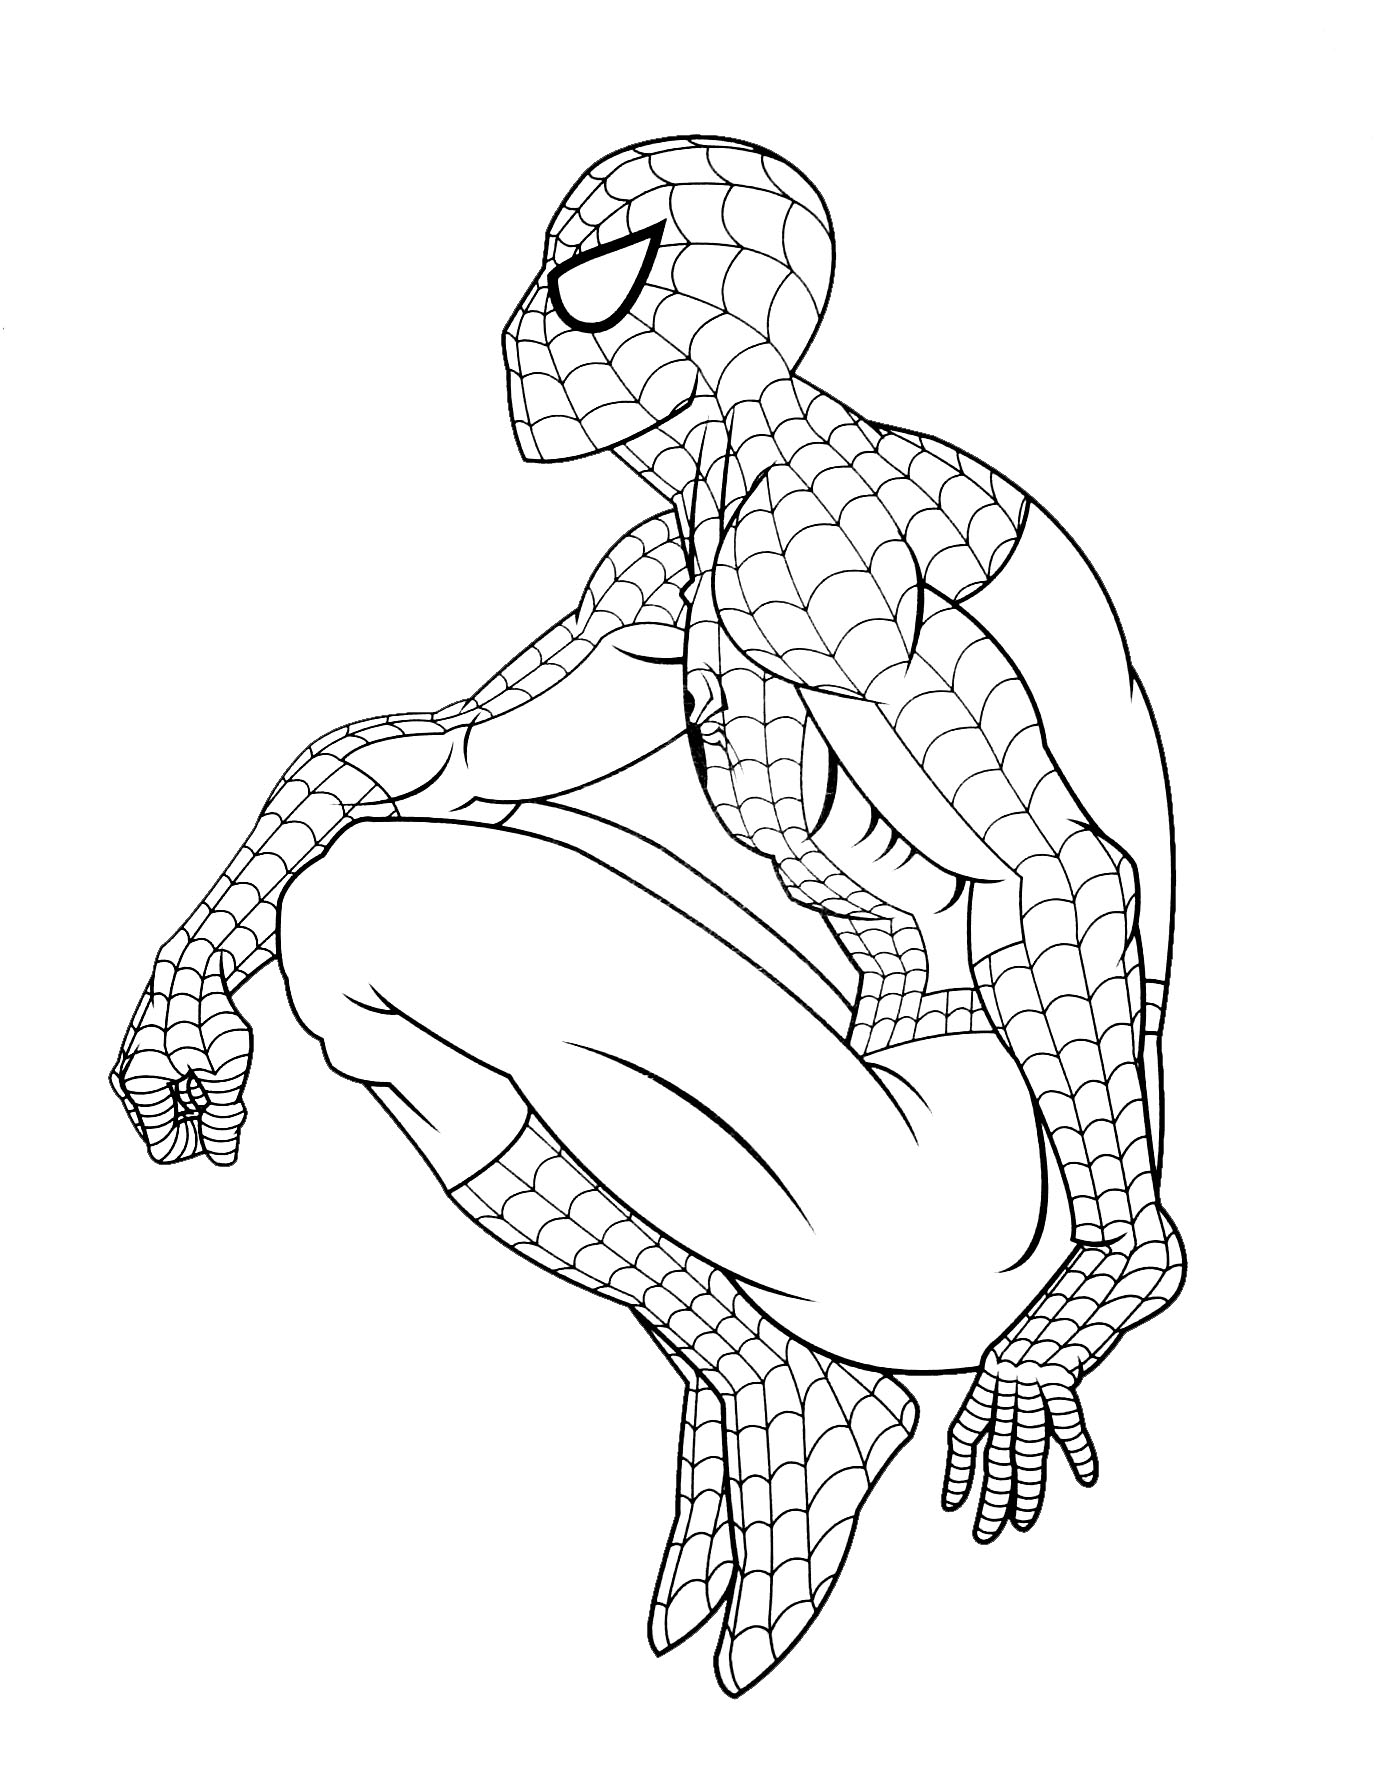 Spiderman coloring pages to download for free - Spider-Man Kids ...